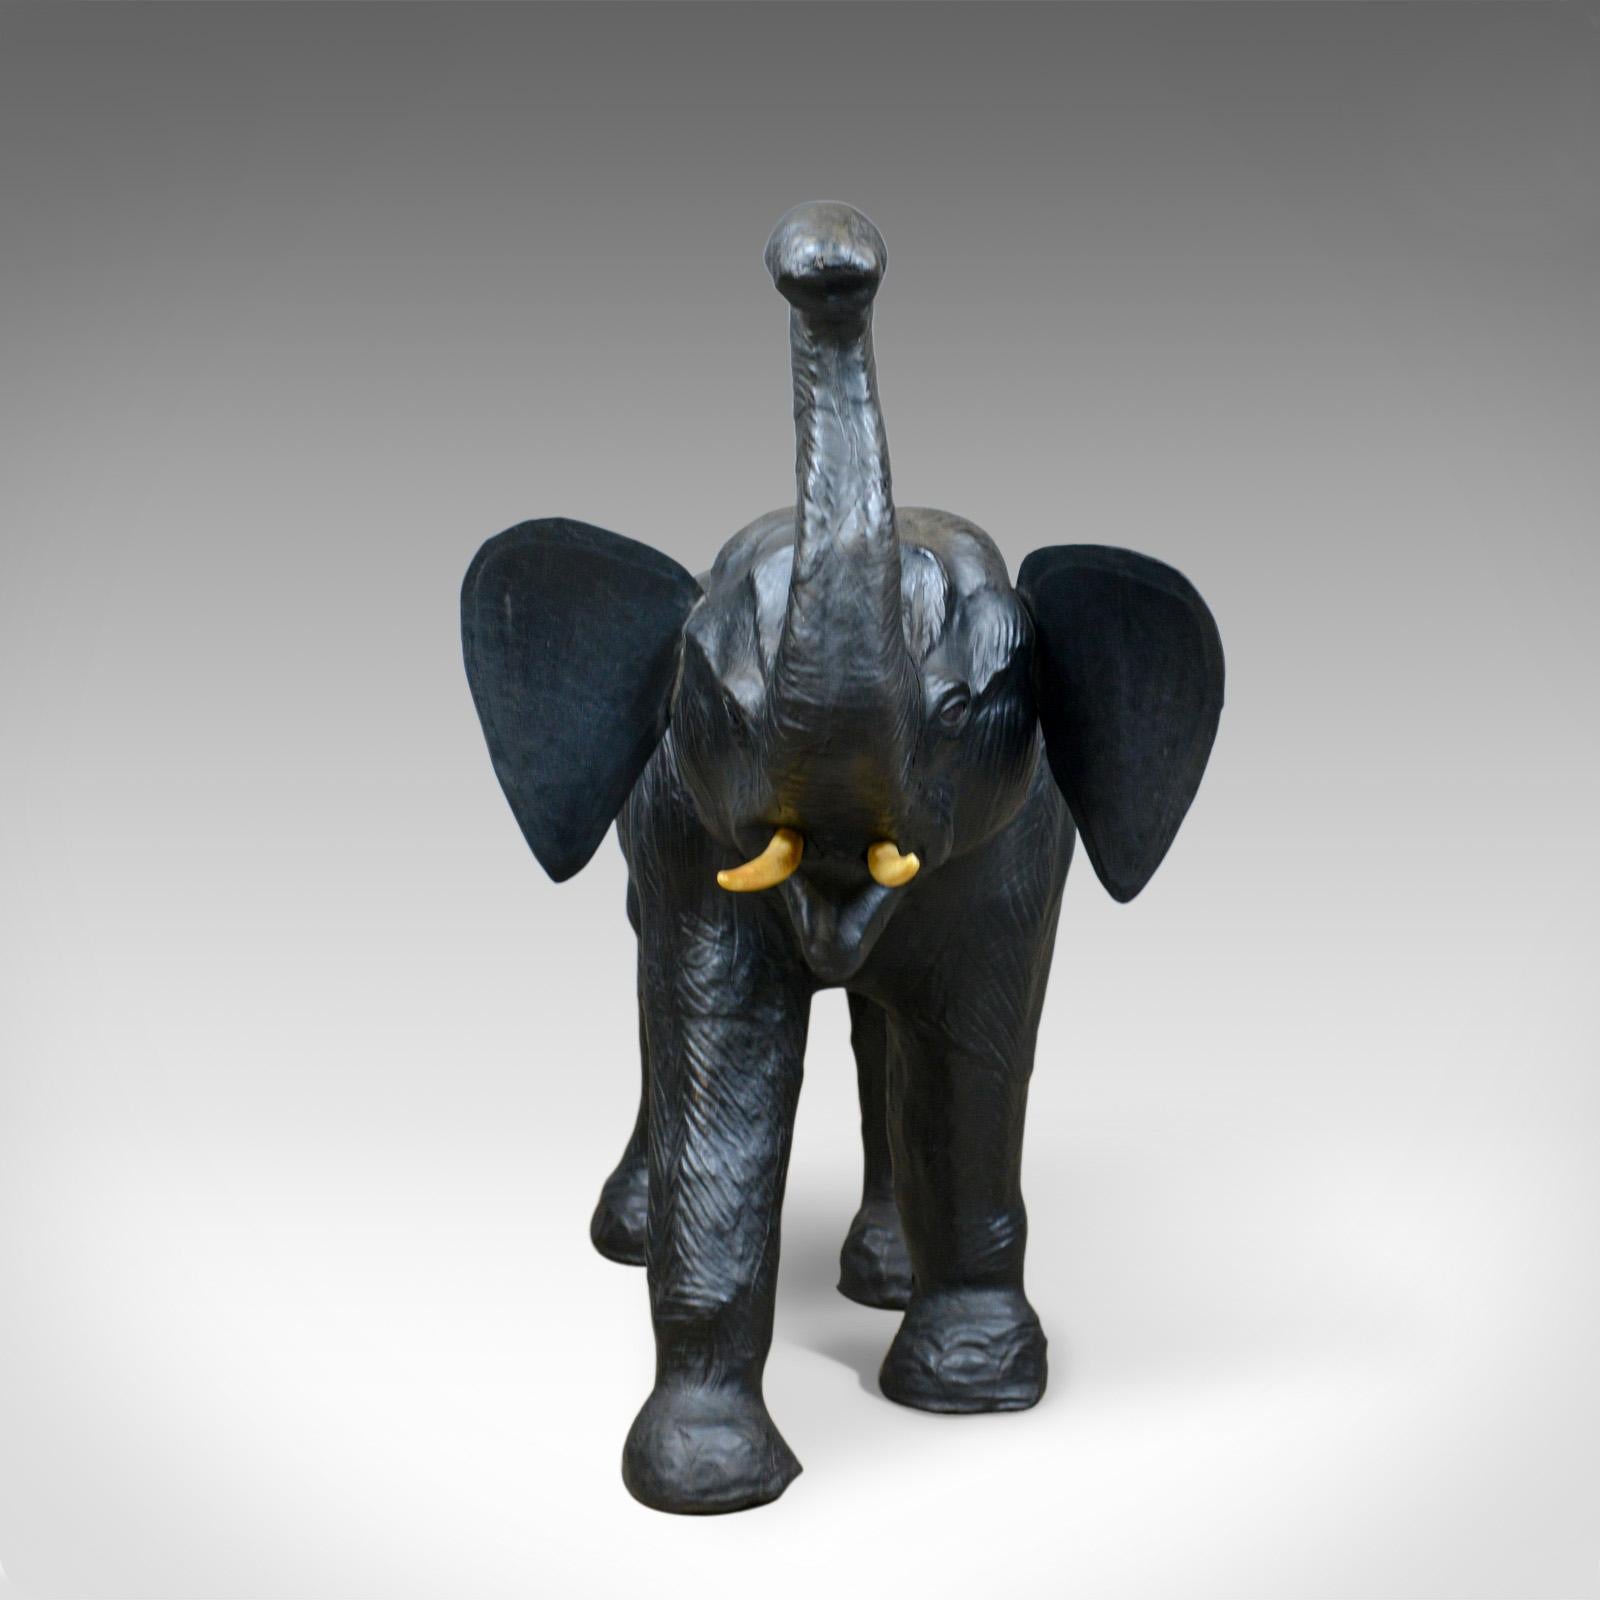 This is a large, vintage leather elephant sculpture. A three foot tall, at trunk (72cm to back) striding elephant model dating to the mid-20th century.

Superbly modelled and detailed sculpture
In a quality black leather hide with a desirable